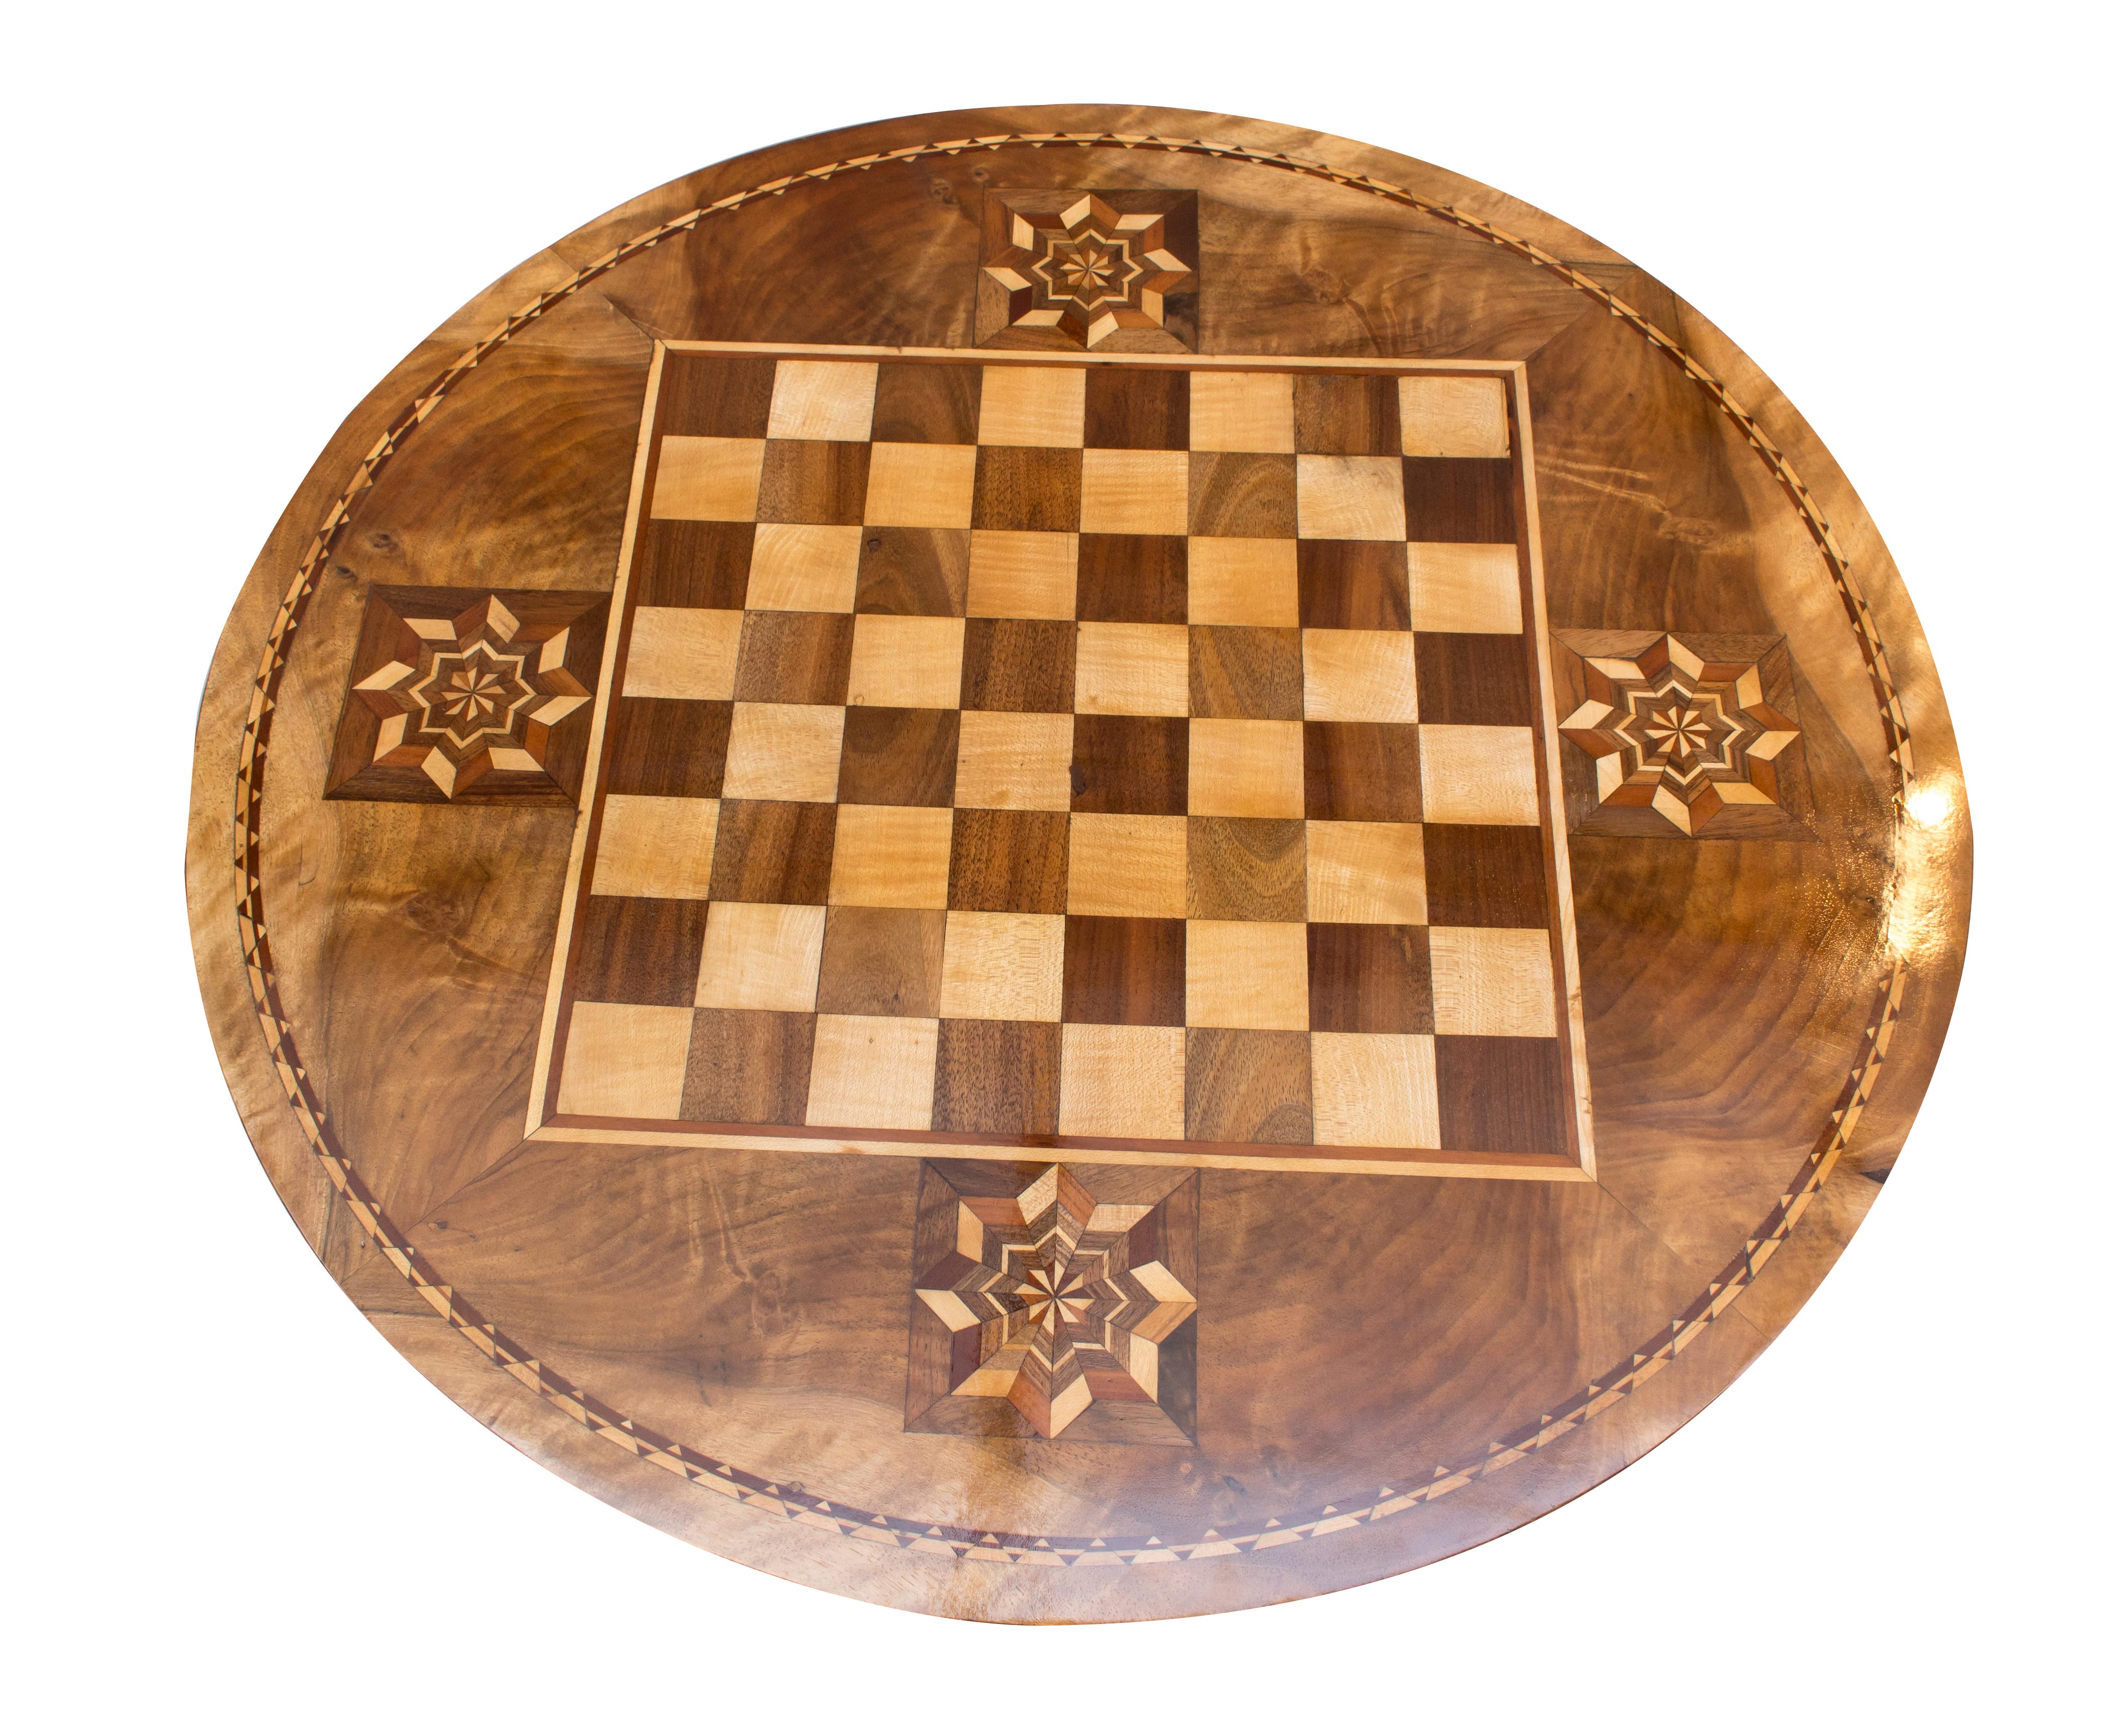 The table stands on a central baluster column which itself rests on three booms at the bottom. The tabletop with a decorated chessboard is a very beautiful marquetry work. The foot is made of pear wood, the table mainly of walnut with various fruit